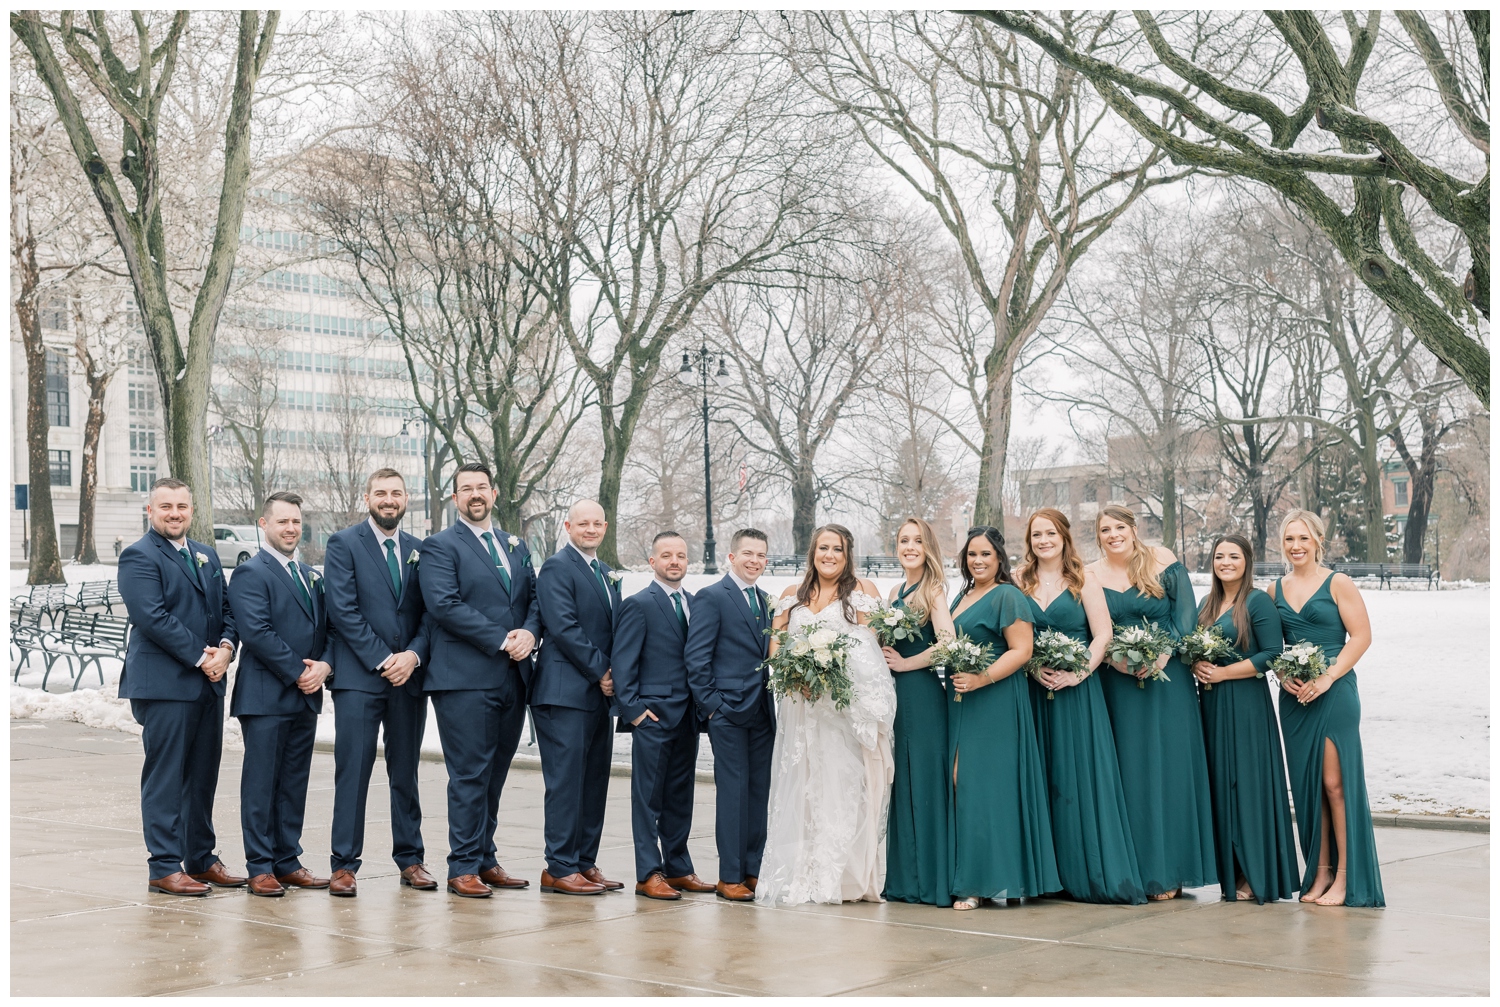 Wedding party on a wedding day all in a row. Bridesmaids are wearing beautiful deep green dresses while the groomsmen are in navy blue suits with matching green ties. This wedding was in downtown Albany, NY by the Capital building on a snowy March day.